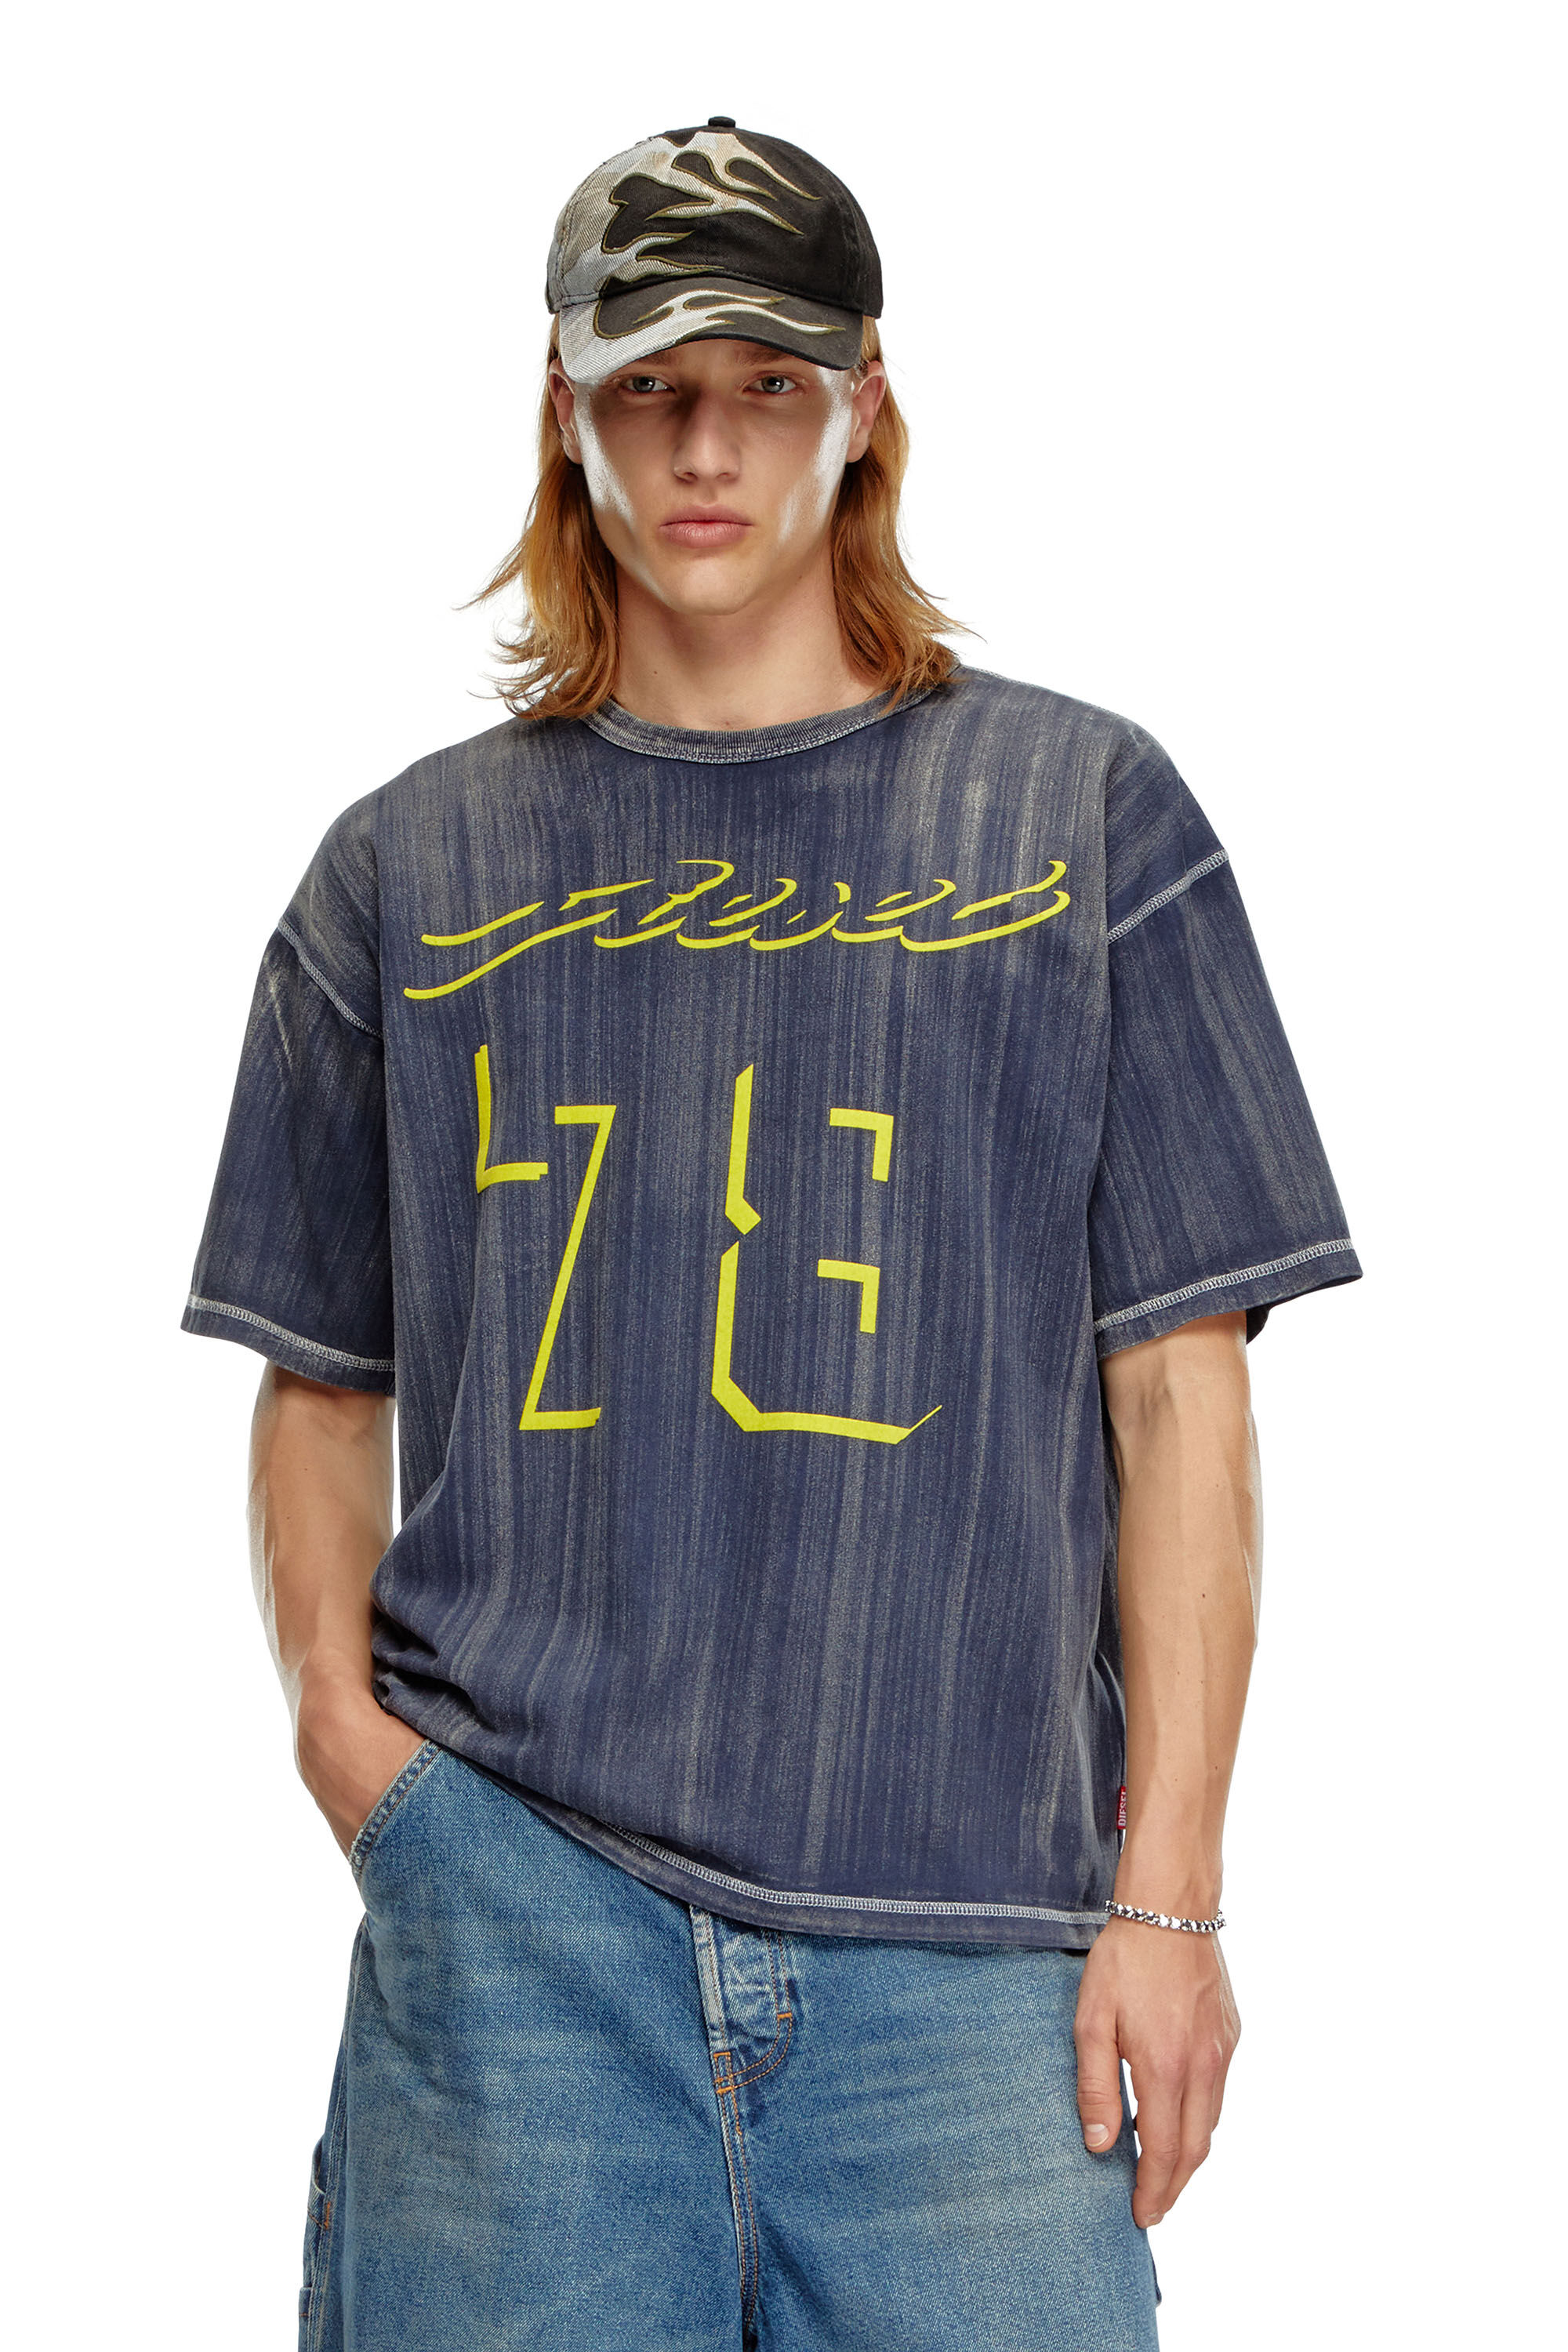 Diesel - T-BOXT-Q2, Man Treated T-shirt with flocked logo in Blue - Image 3